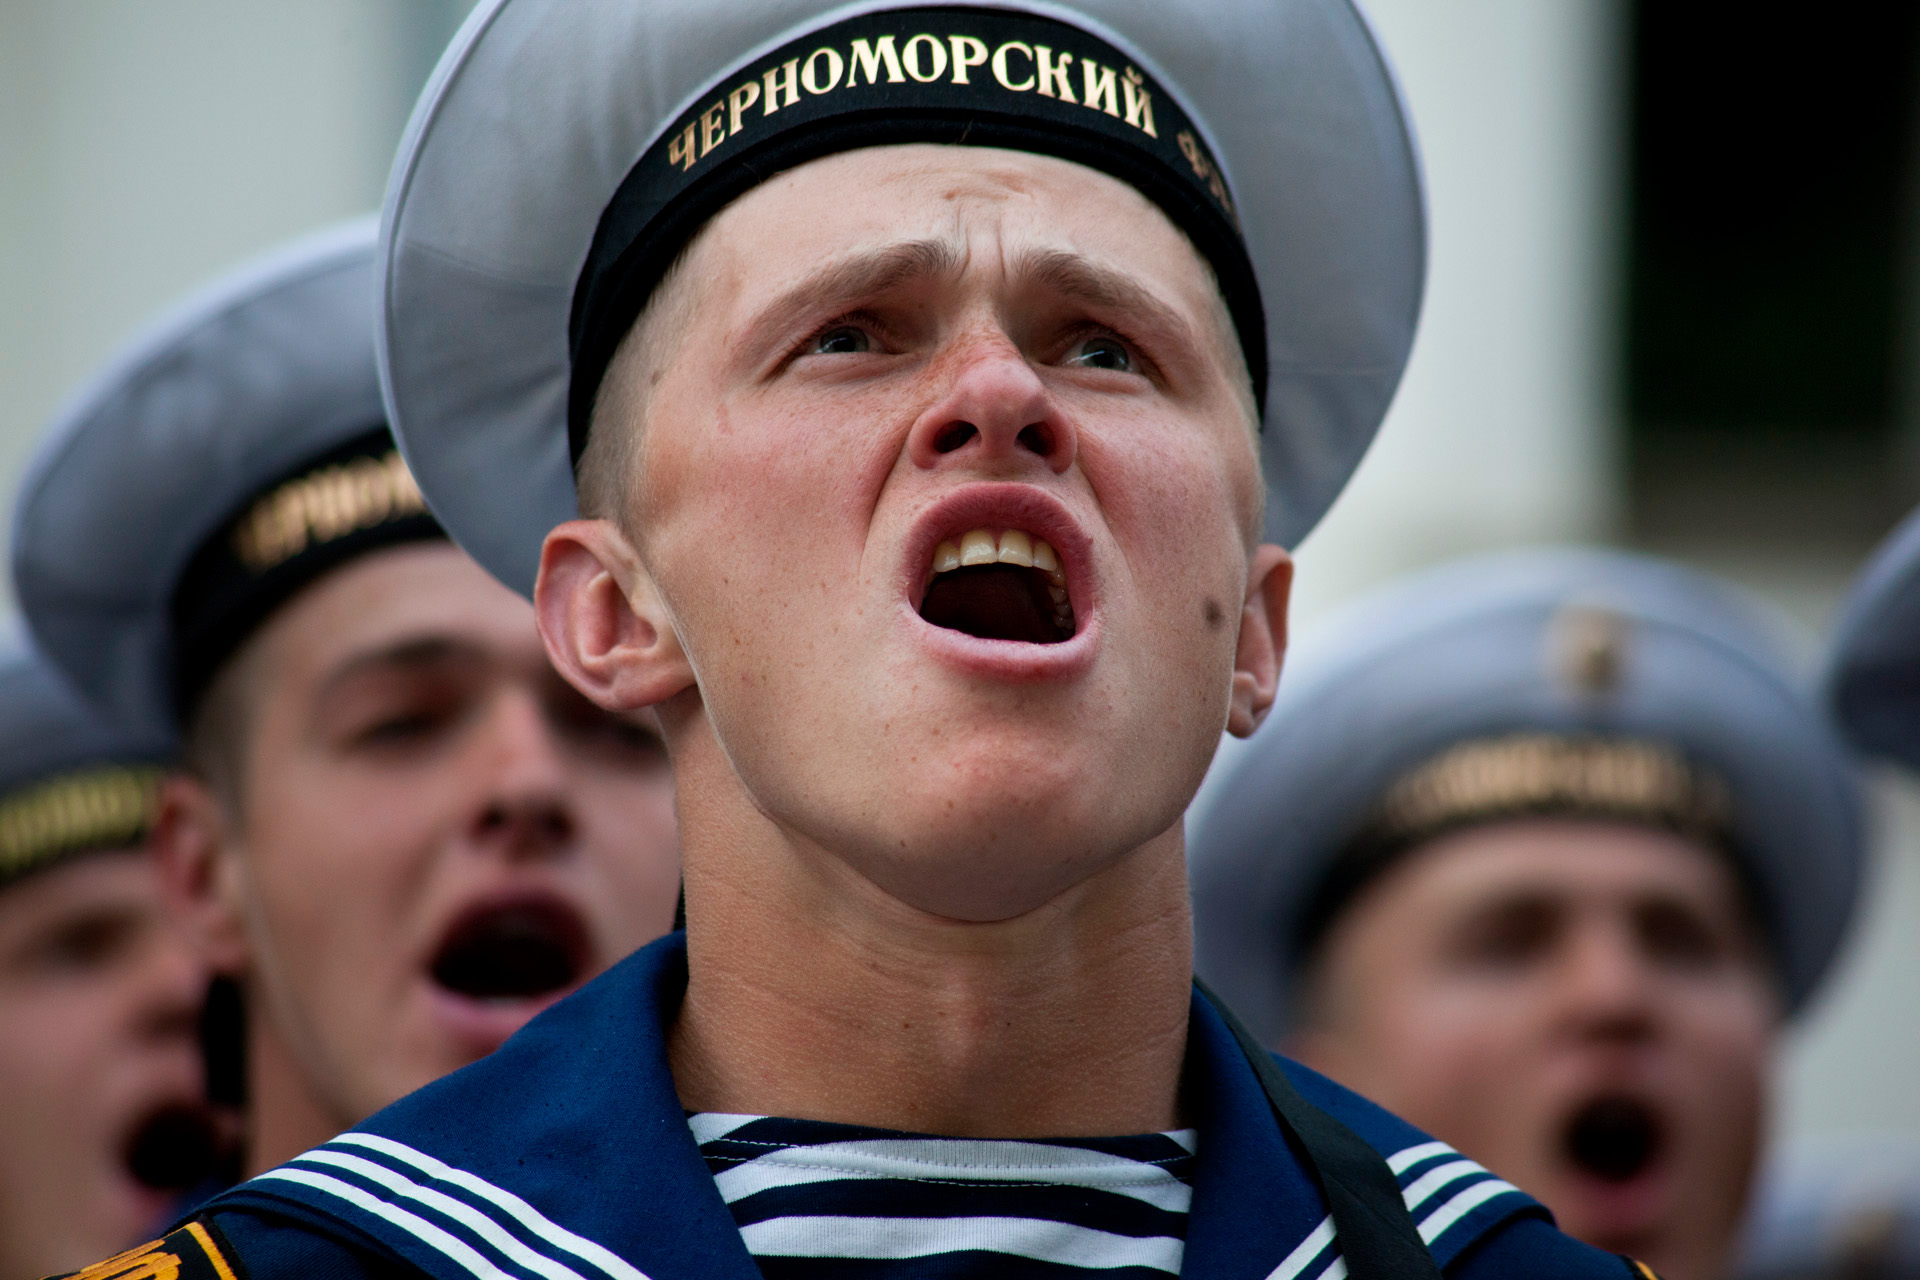  Side by side, Russian and Ukrainian Navy troops rehearse the anthem for the May 9th Victory Day parade, which marks the anniversary of the Soviet Unions victory over Nazi Germany in WWII.  Sevastopol, Crimea  